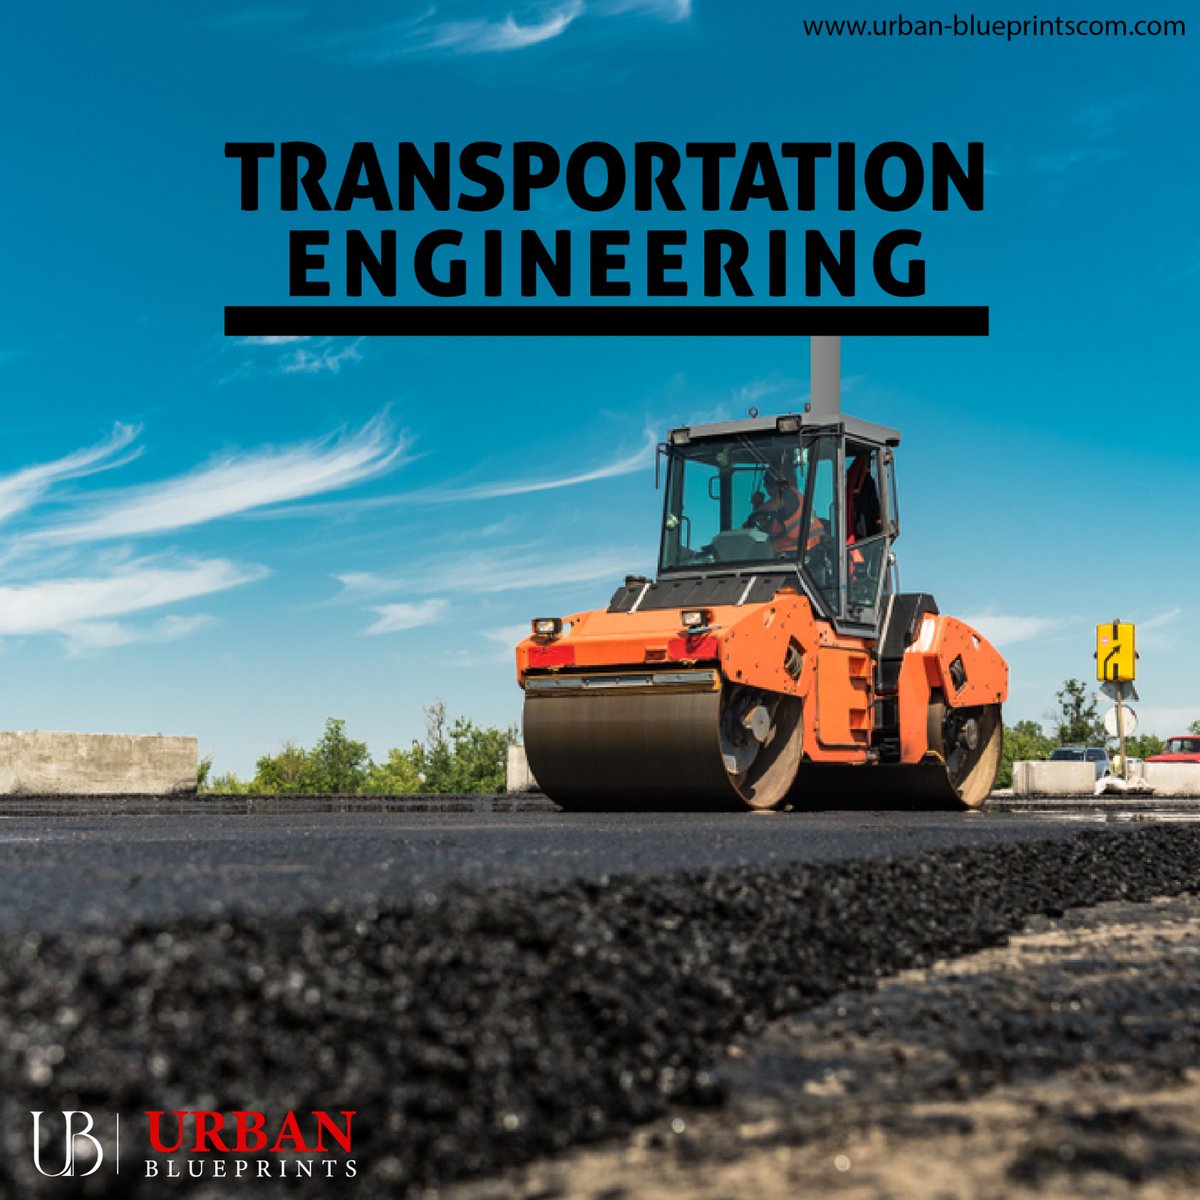 Transportation engineering is a branch of civil engineering that involves the planning, design, operation, and maintenance of transportation systems to help build smart, safe, and livable communities.
.
.
#urbanblueprints #engineering #TransportServices #TransportationEngineering